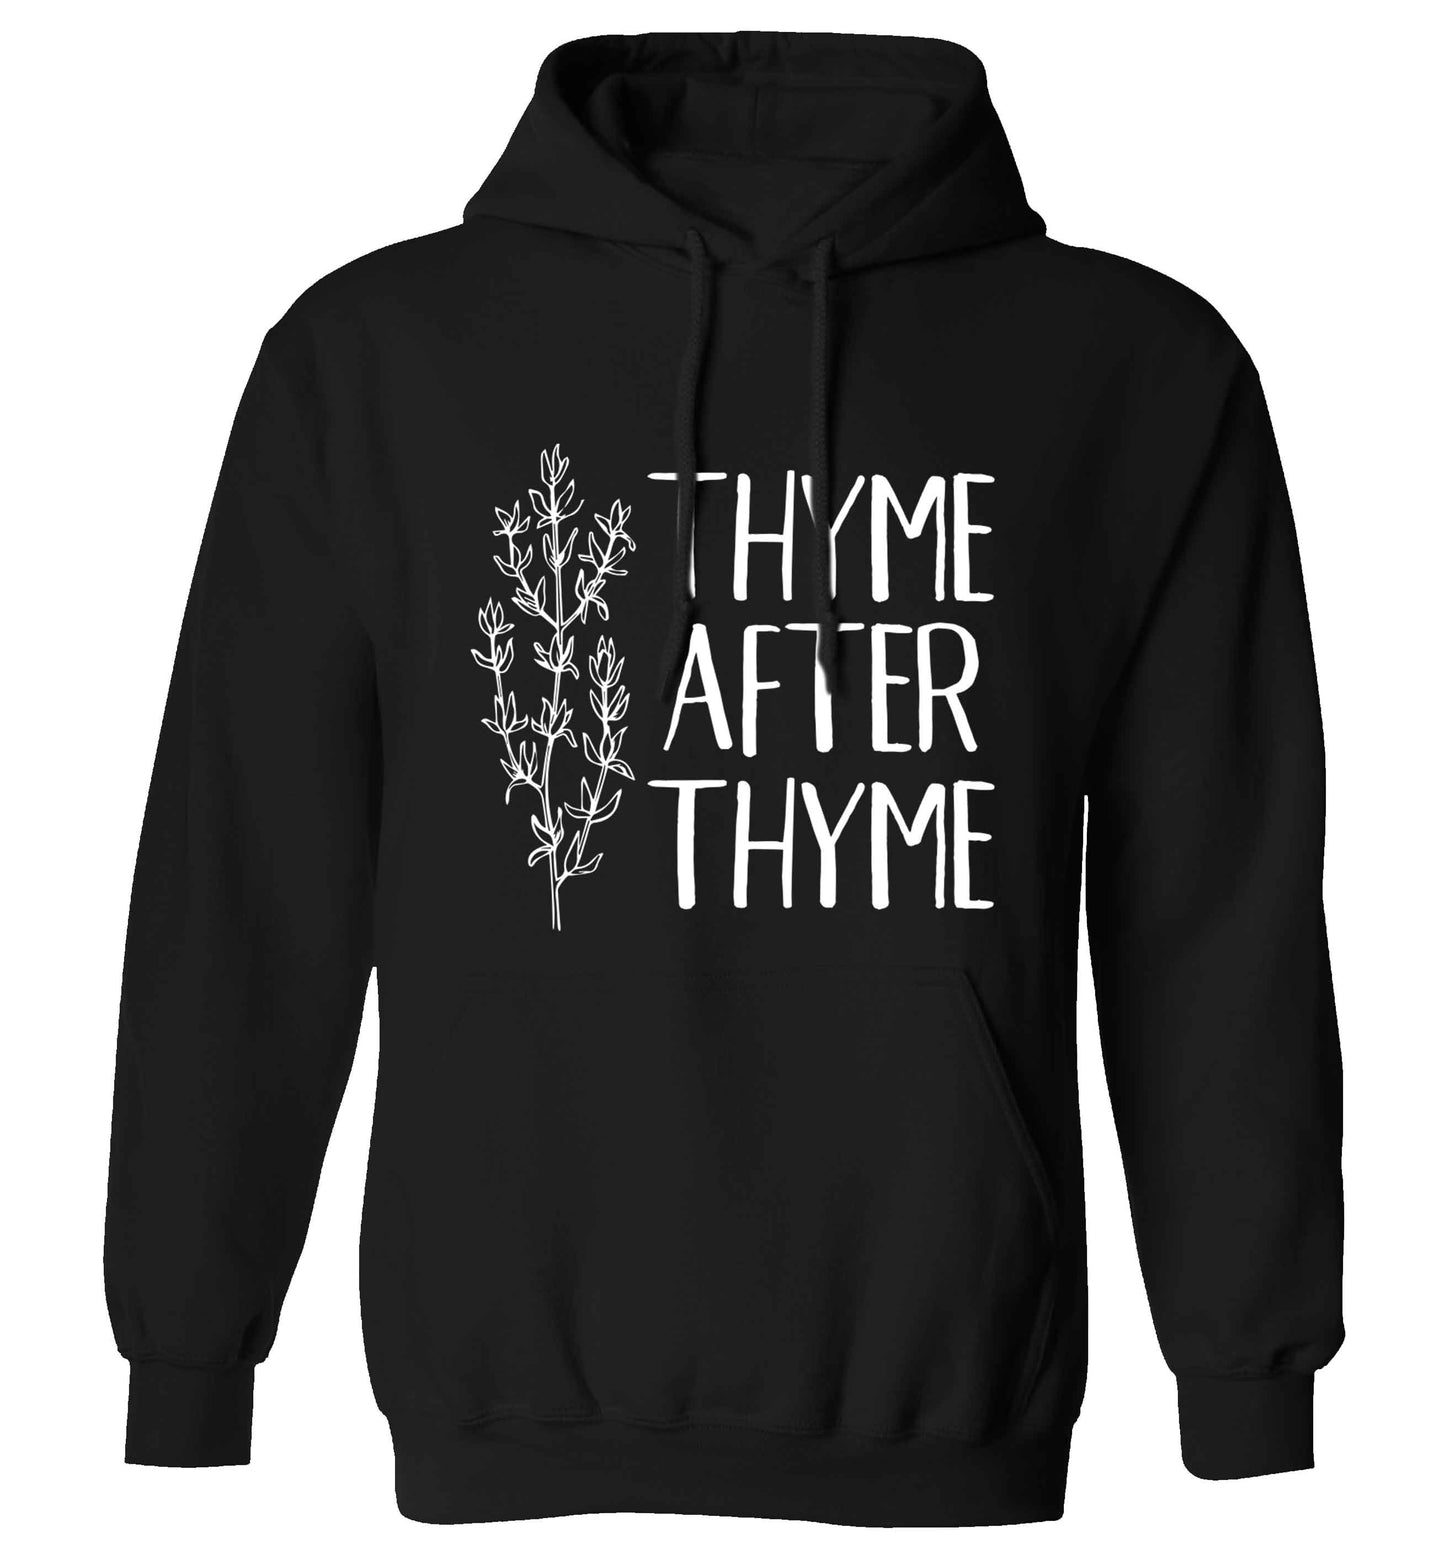 Thyme after thyme adults unisex black hoodie 2XL